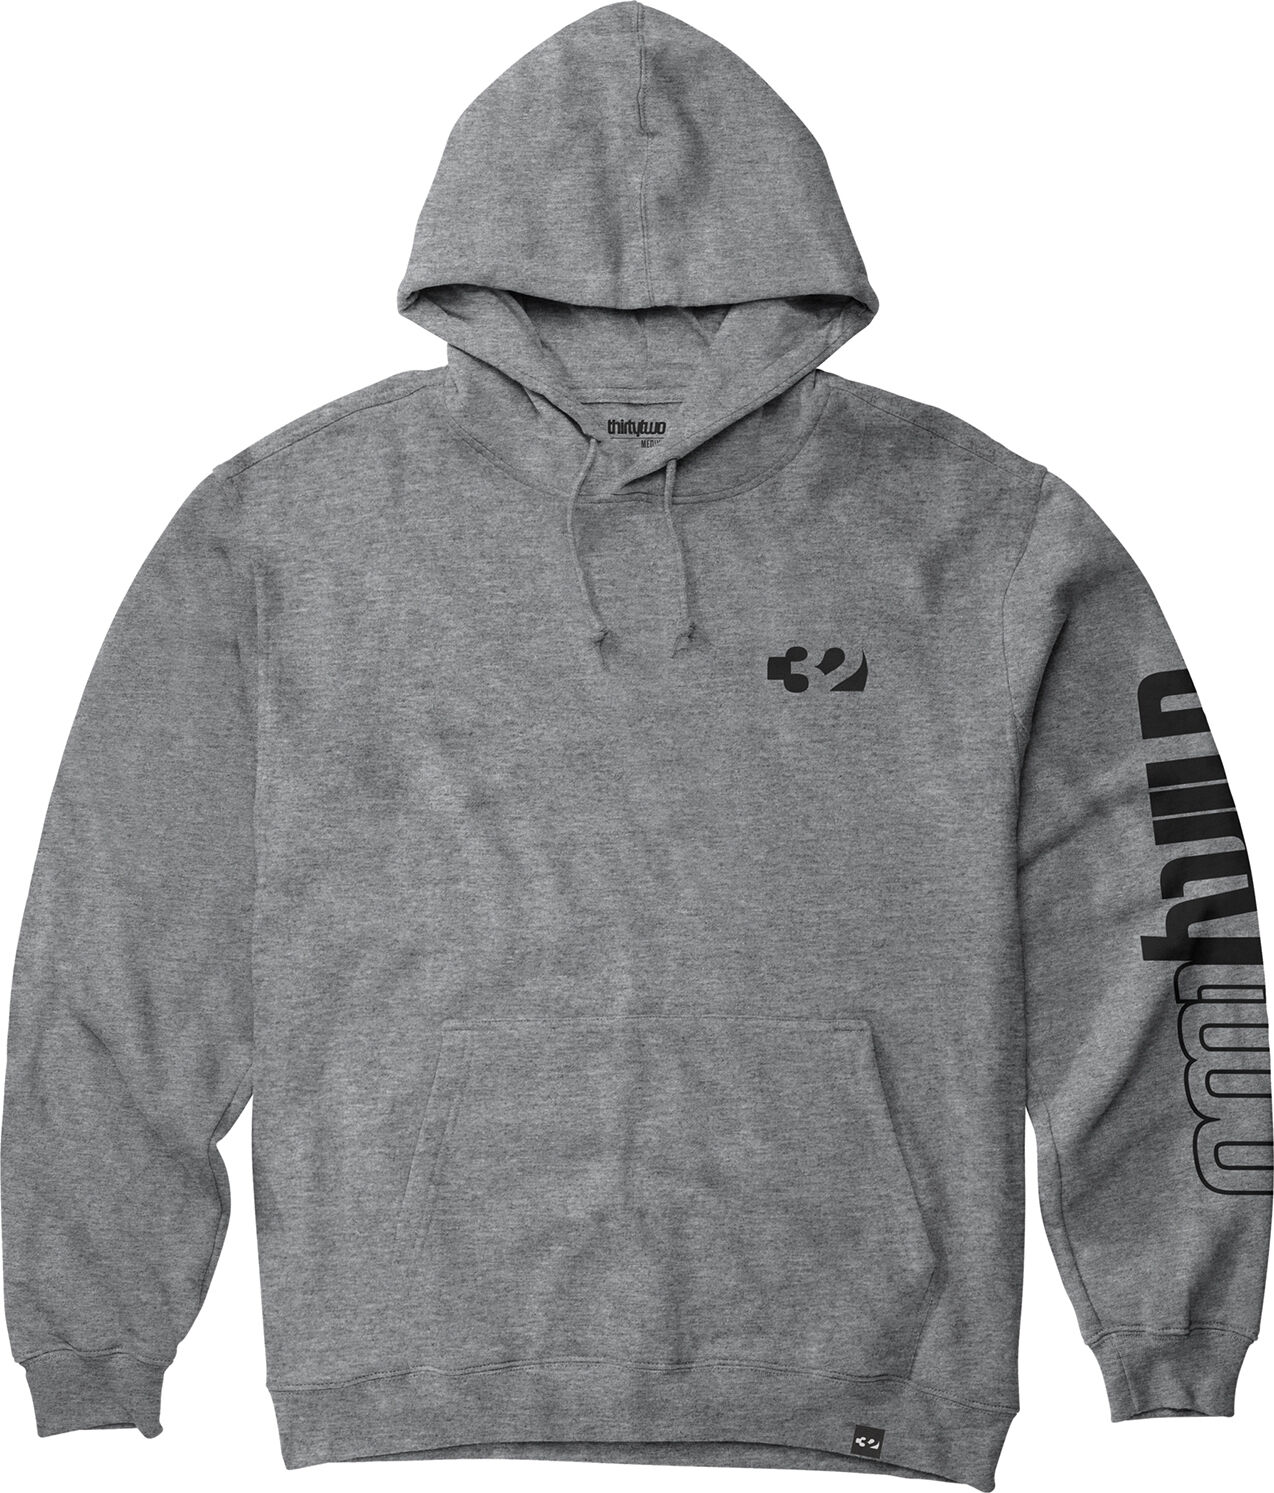 THIRTYTWO DOUBLE HOODIE GREY HEATHER L